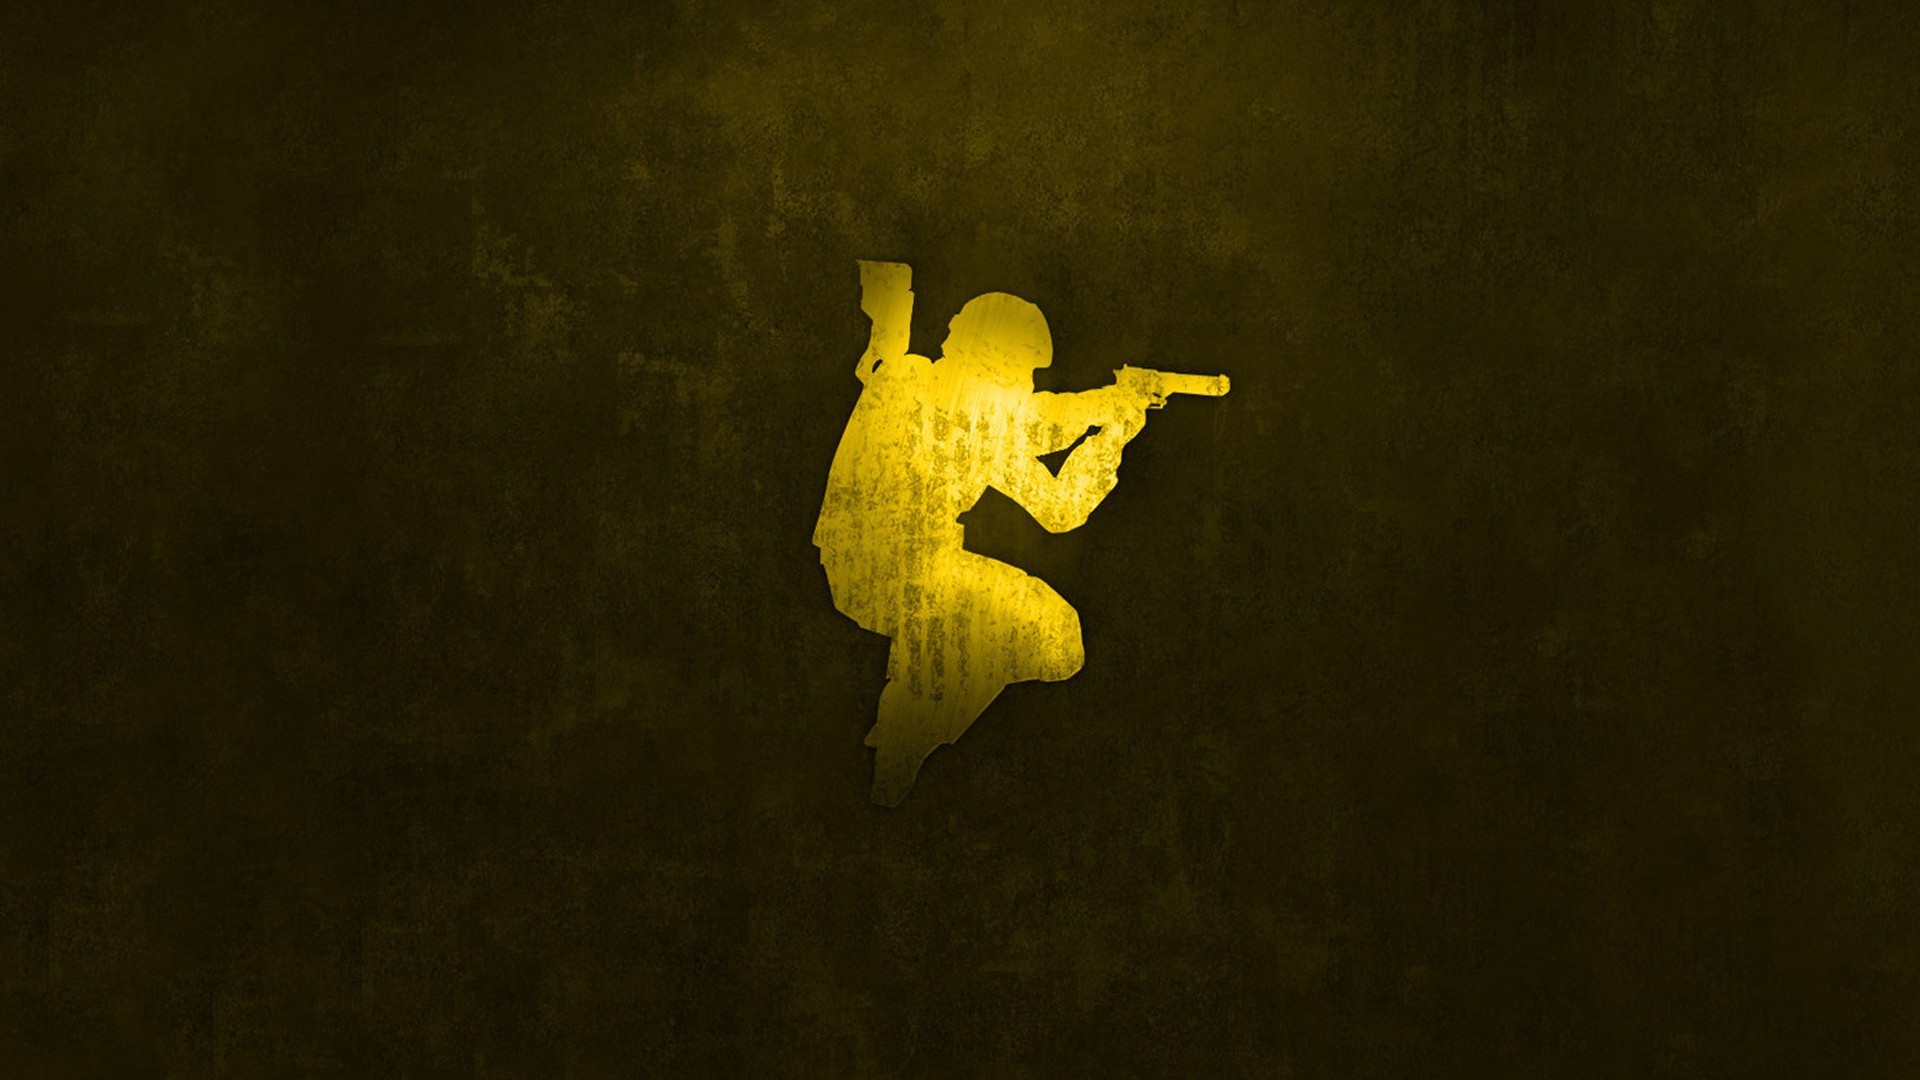 19286 download wallpaper games, background, counter strike, black screensavers and pictures for free